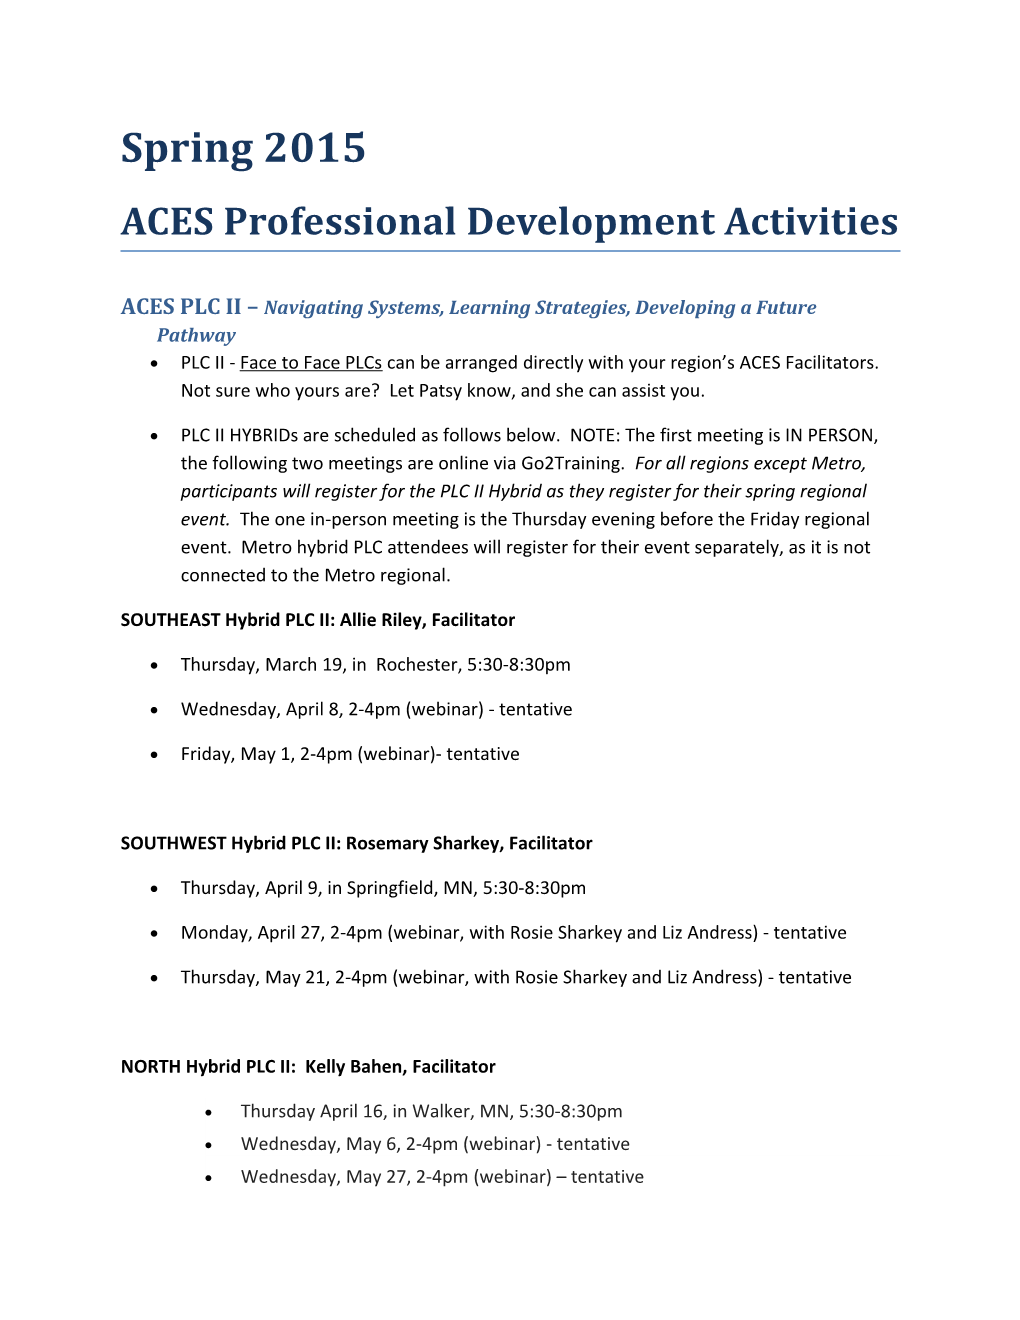 ACES PLC II Navigating Systems, Learning Strategies, Developing a Future Pathway